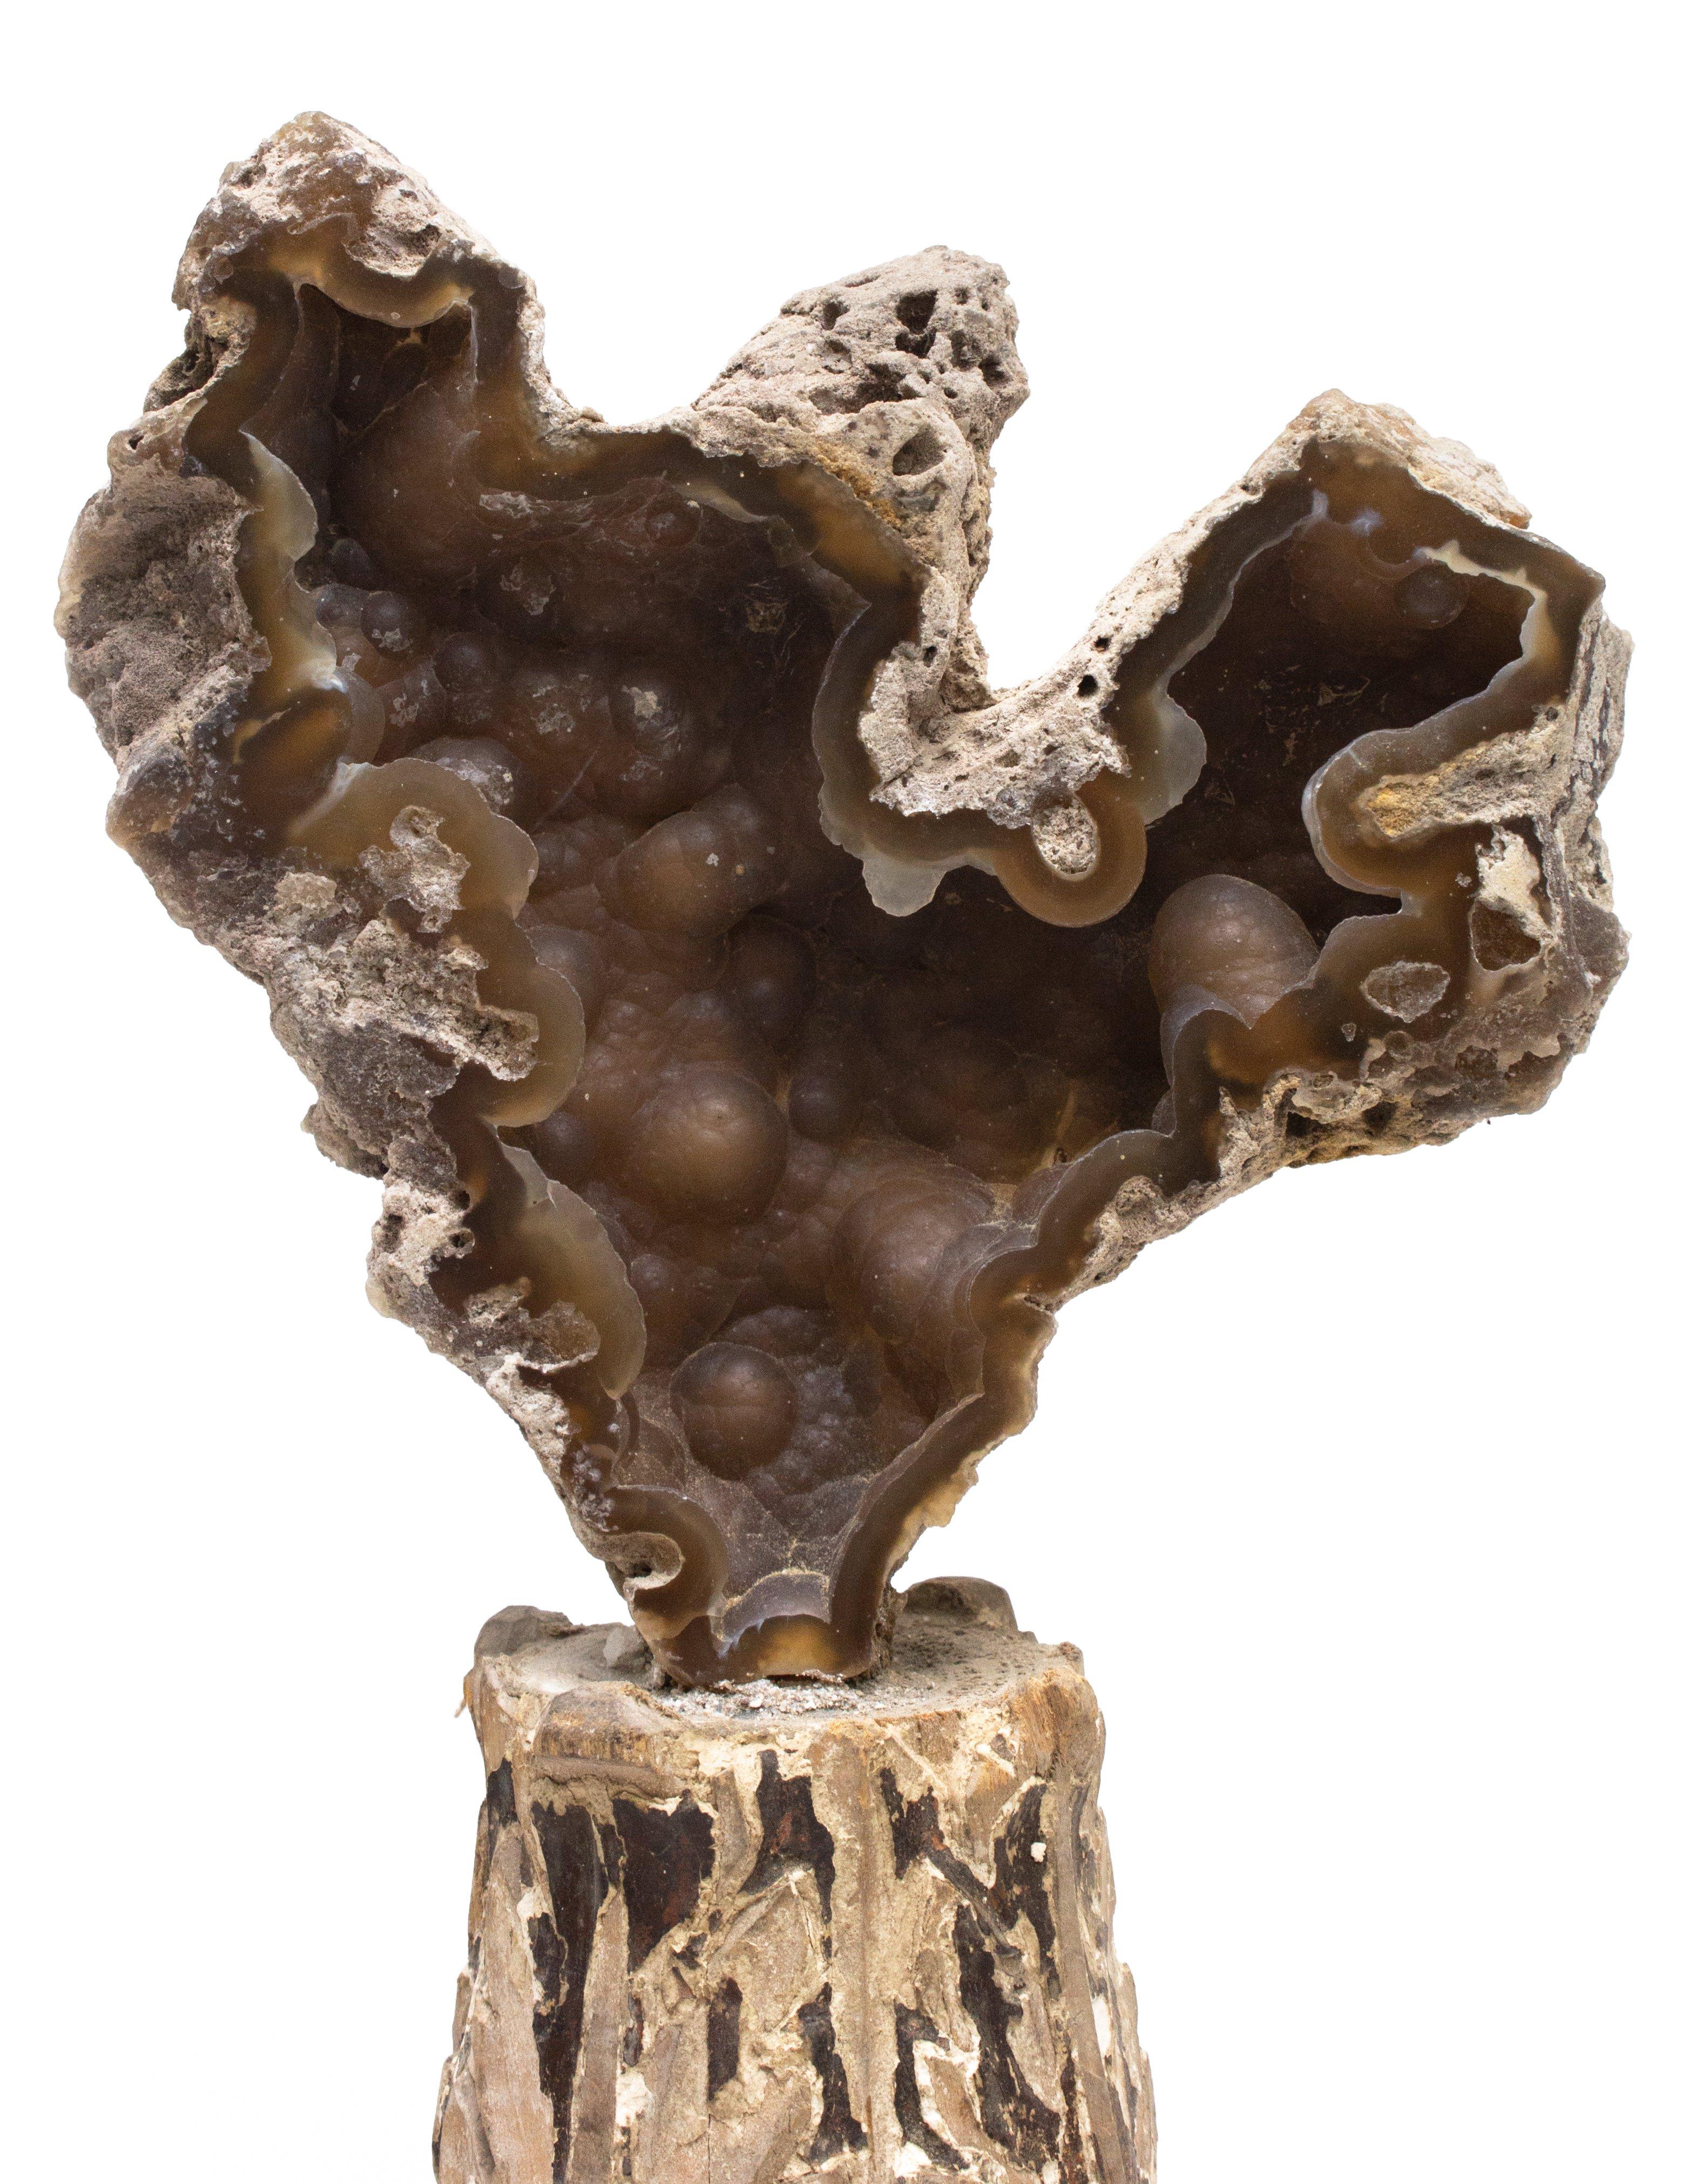 18th century Italian candlestick decorated with fossil agate coral on an agate base. The hand carved 18th century Italian candlestick originally comes from a church in Florence. This particular fragment candlestick was also one found and saved in